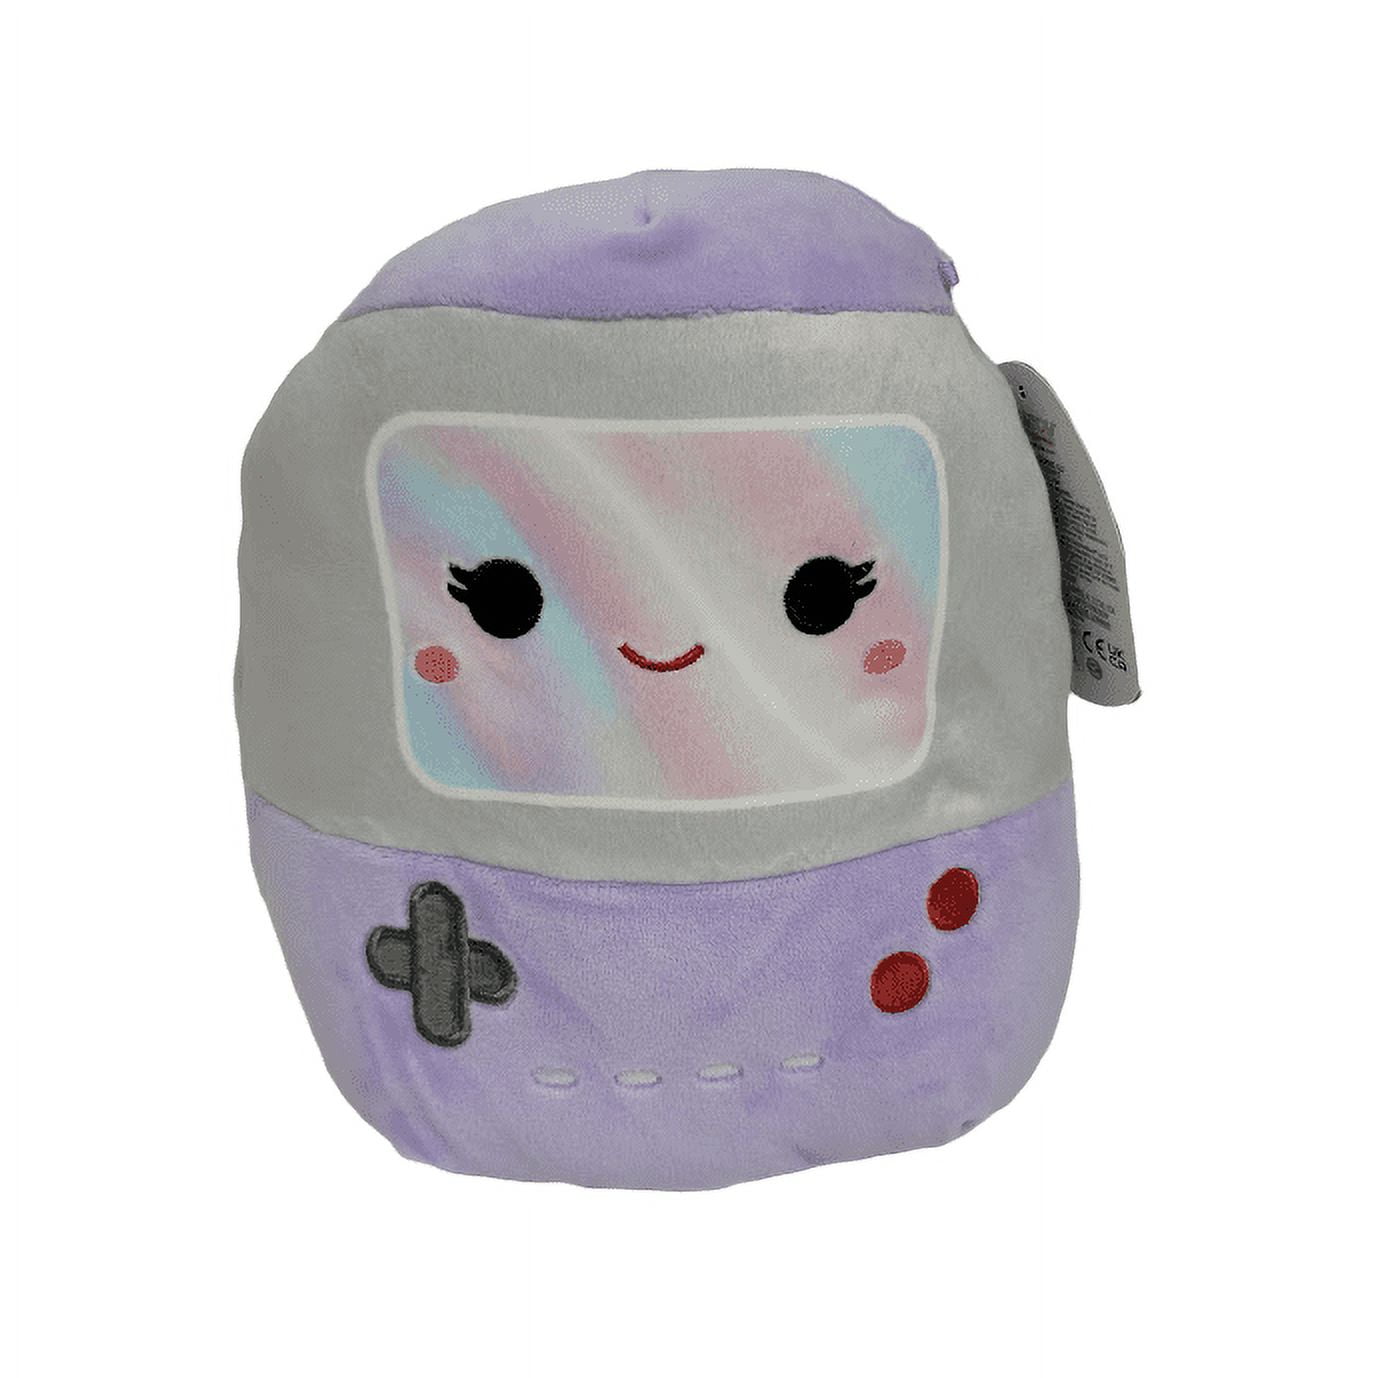 Squishmallows Official Kellytoys Plush 8 inch Galia The Gameboy Ultimate Soft Stuffed Toy, Purple